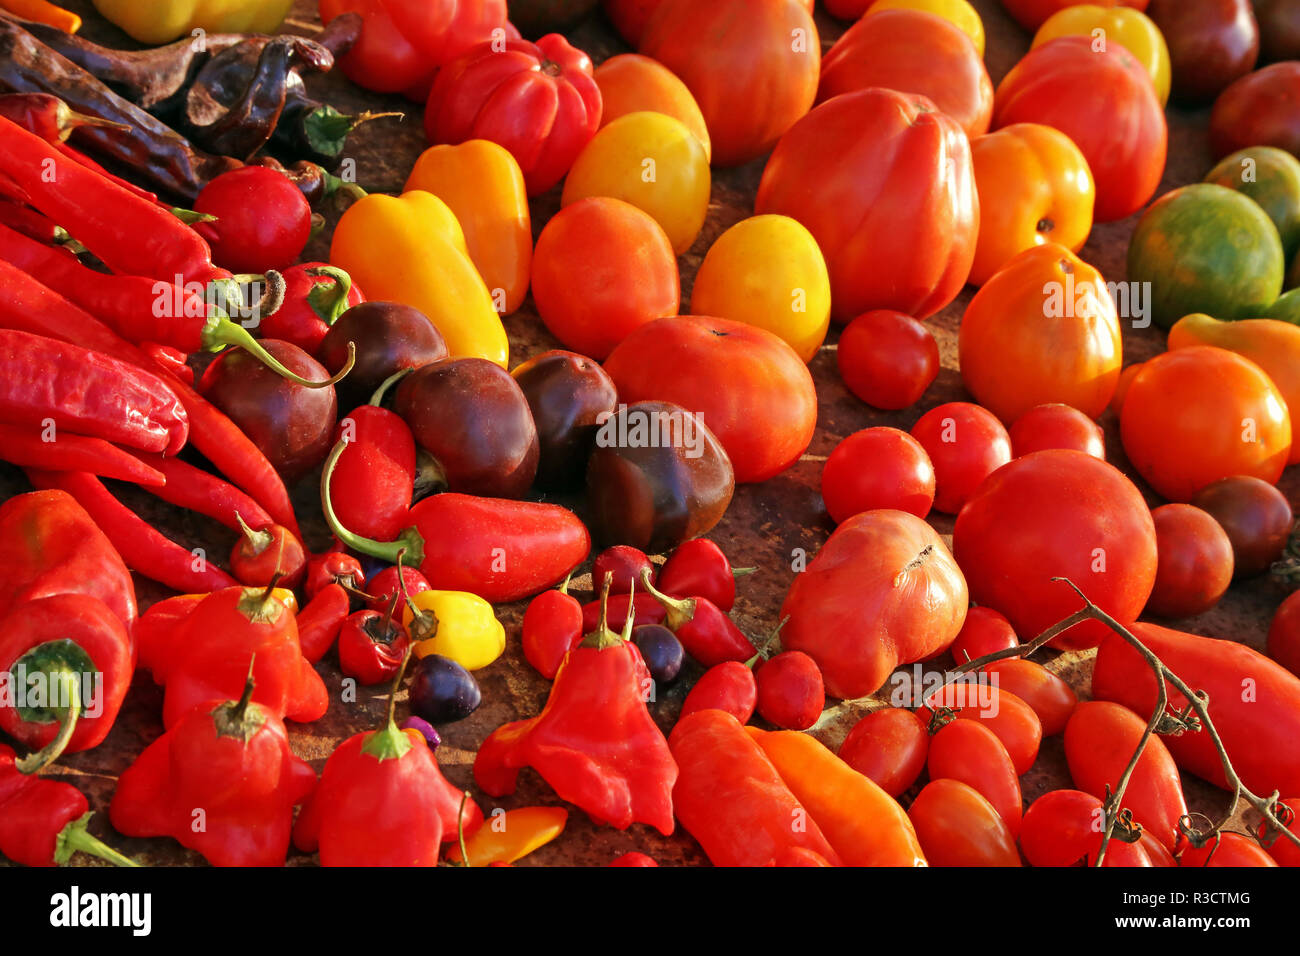 variety of colors and shapes of the tomato Stock Photo